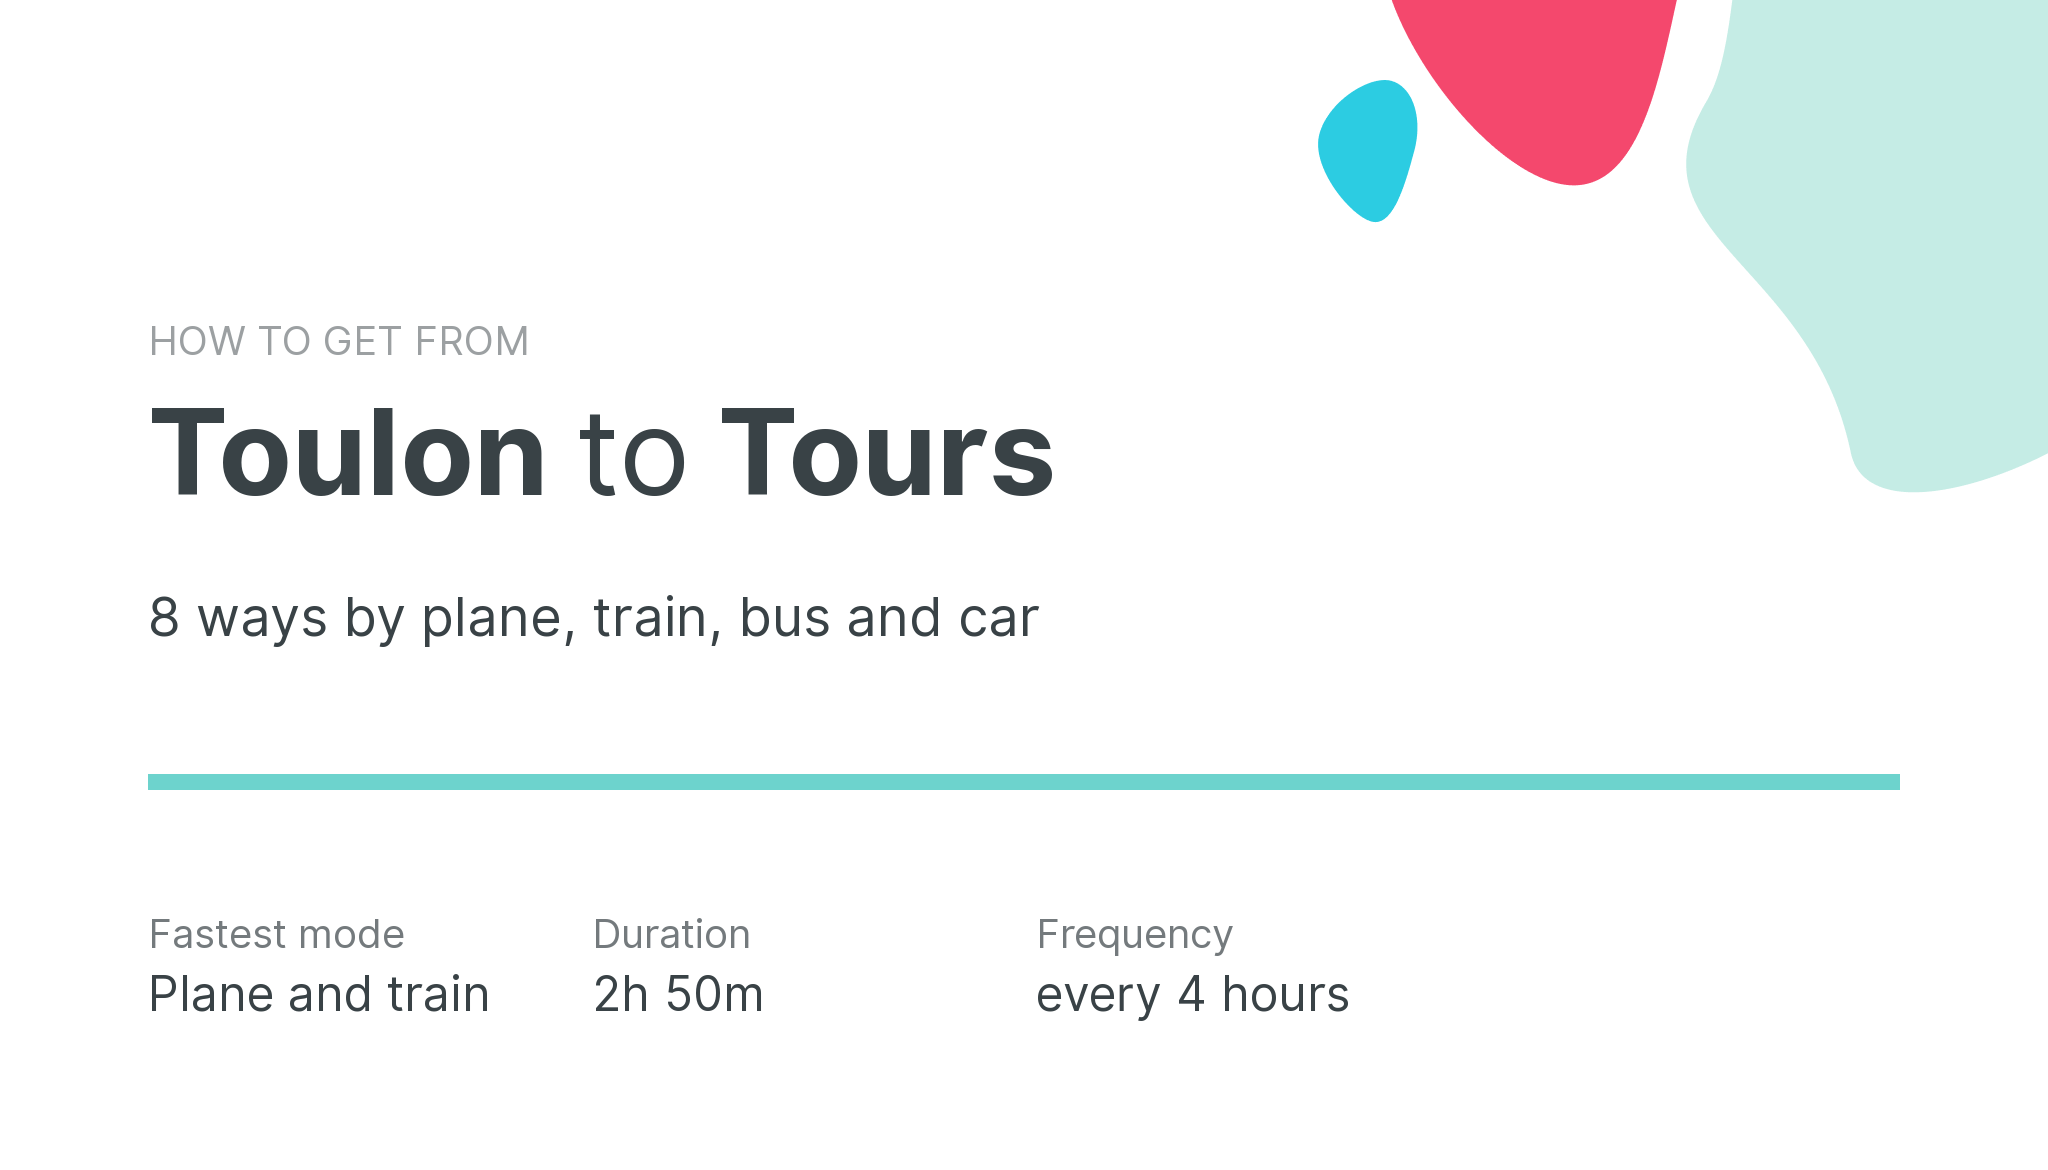 How do I get from Toulon to Tours